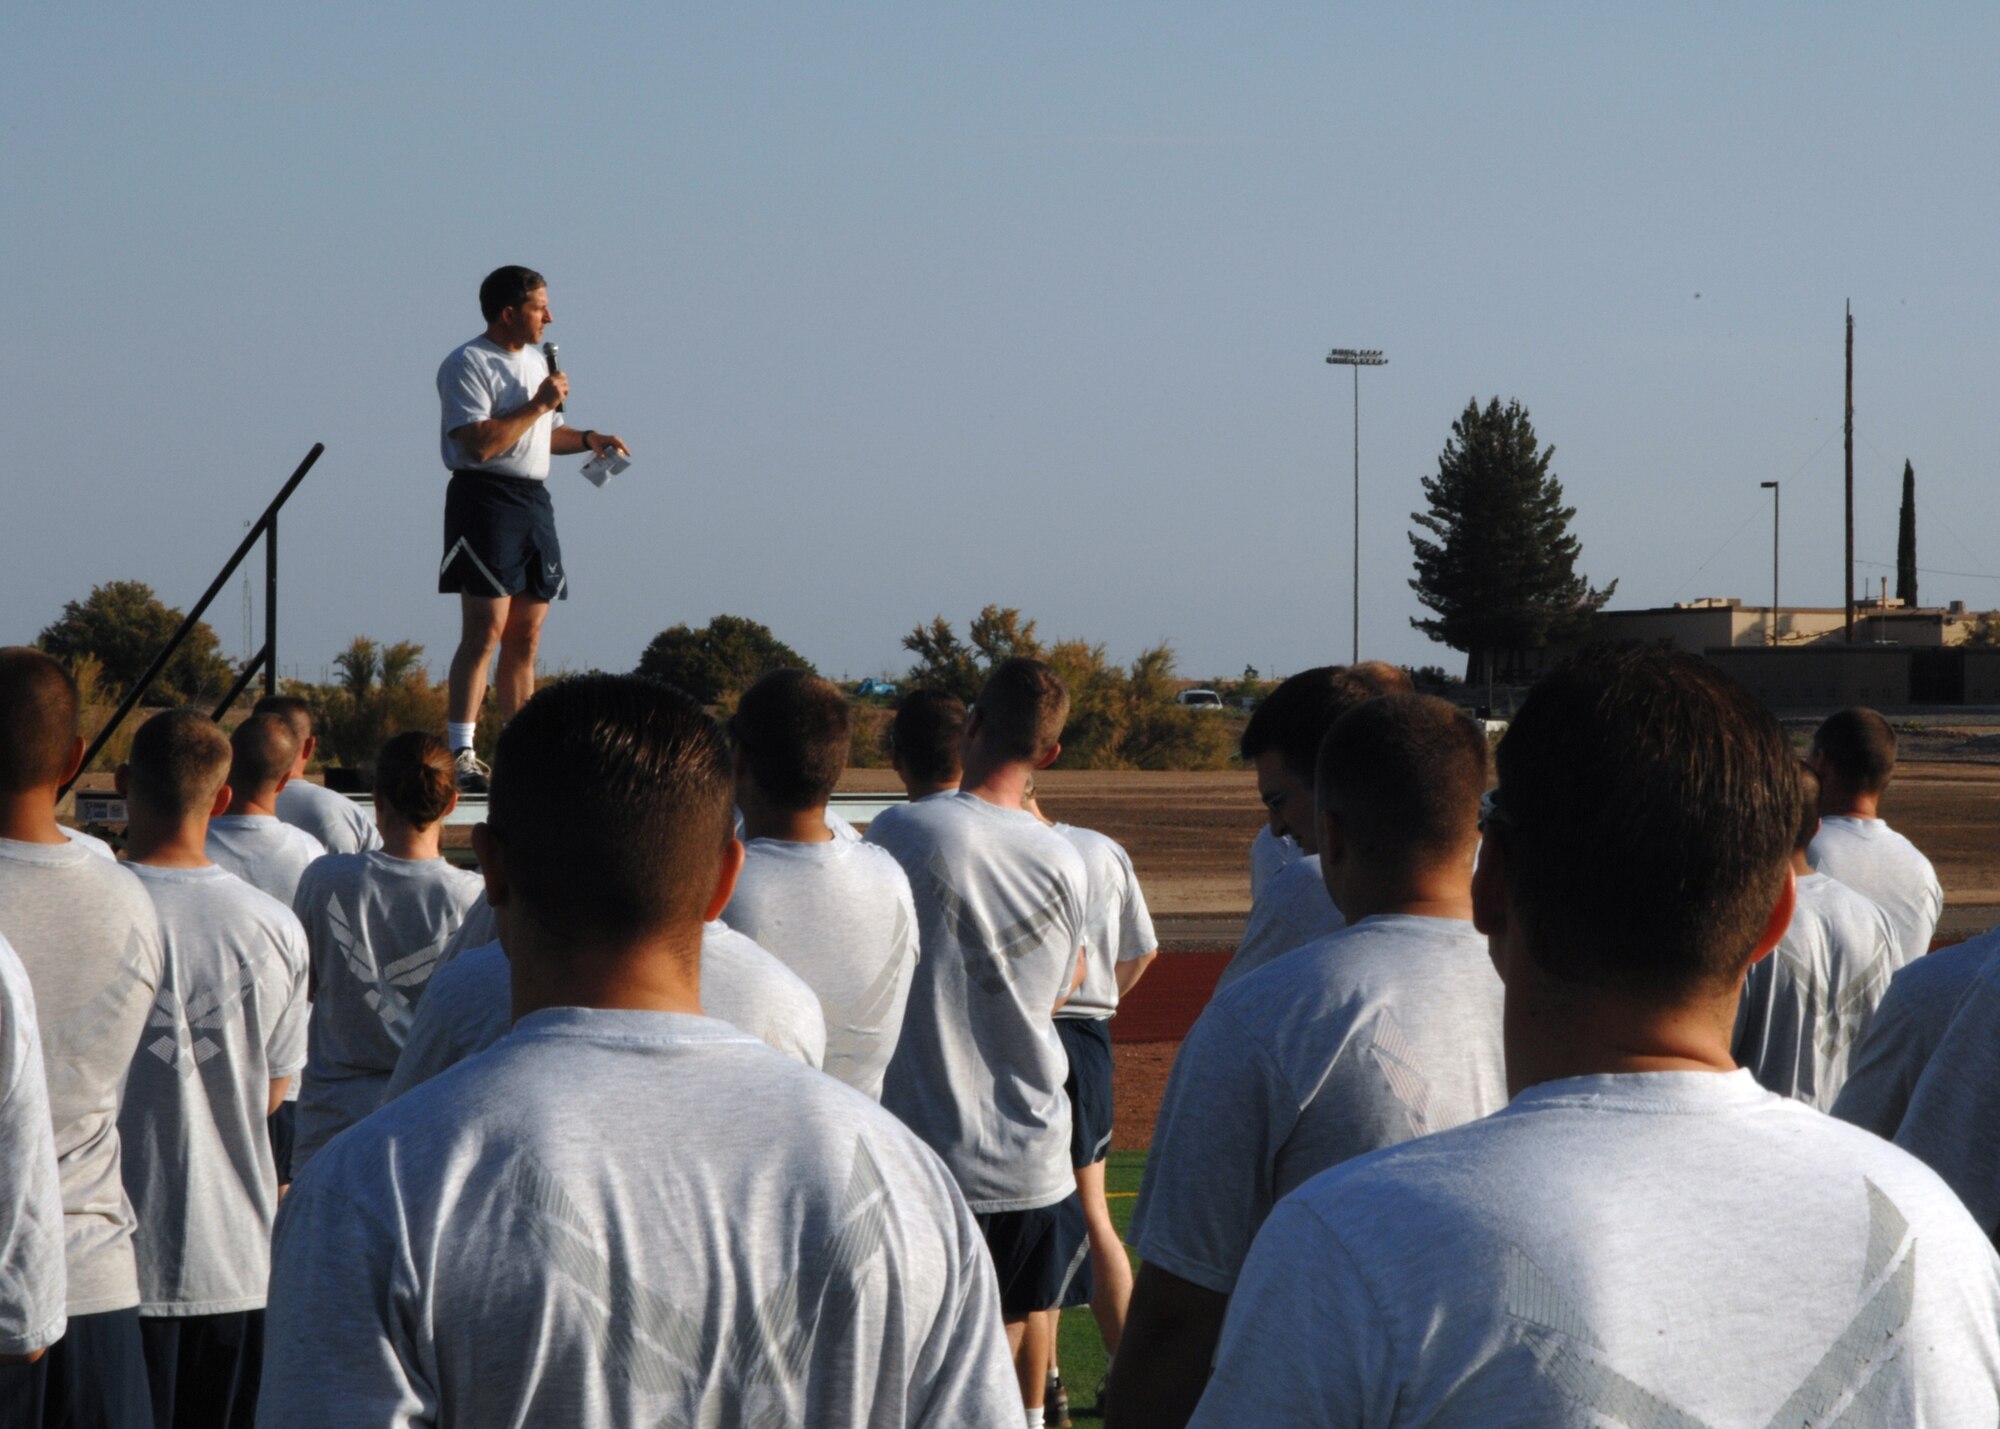 Brig. Gen. David Goldfein, 49th Fighter Wing commander, led the wing run, kicking off Safety/Sports Day and the 101 Critical Days of Summer. (U.S. Air Force photo/Airman 1st Class Jamal Sutter)